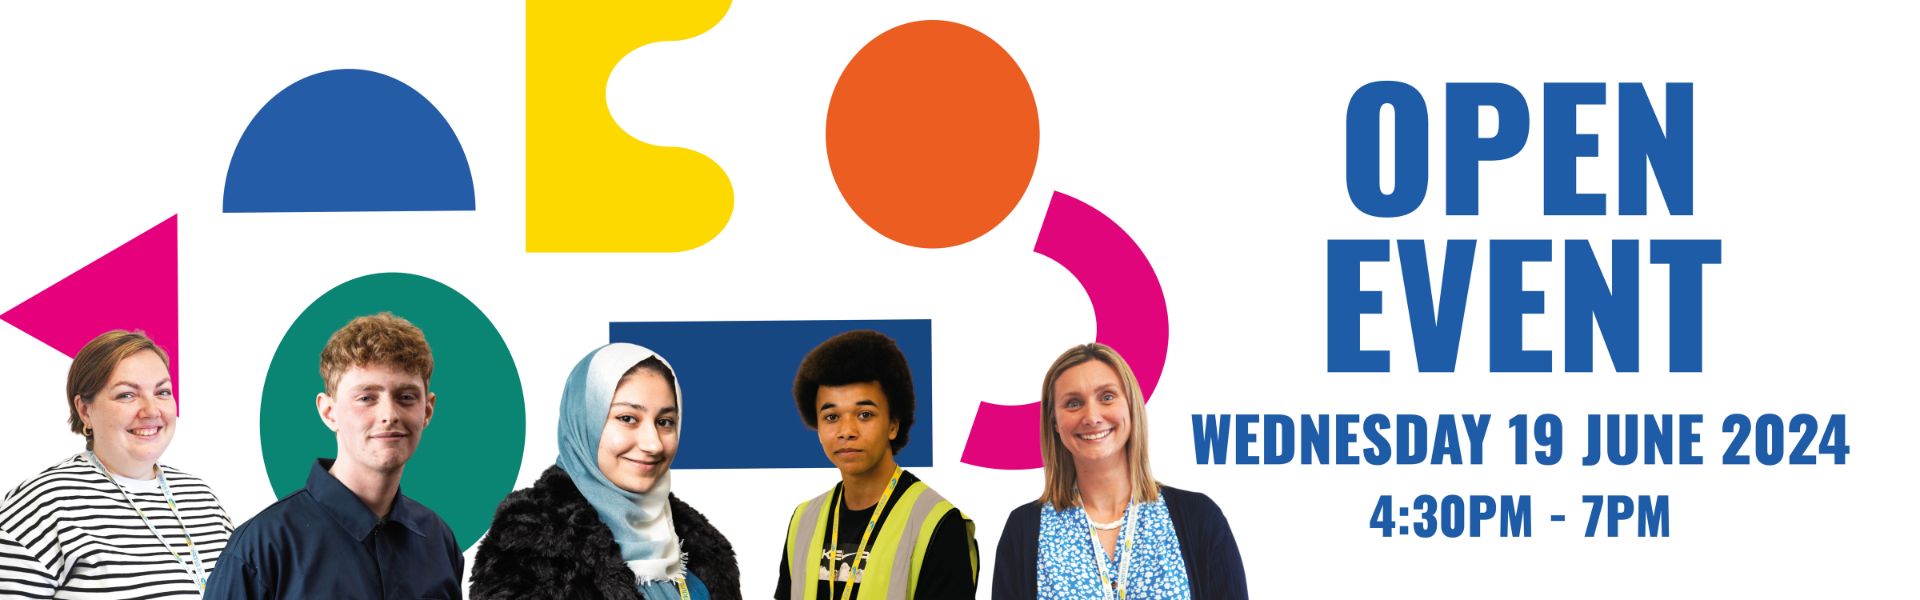 Visit our Open Day Wednesday 19th June 4:30pm to 7pm. Wednesday 19th June, 4:30pm to 7pm.